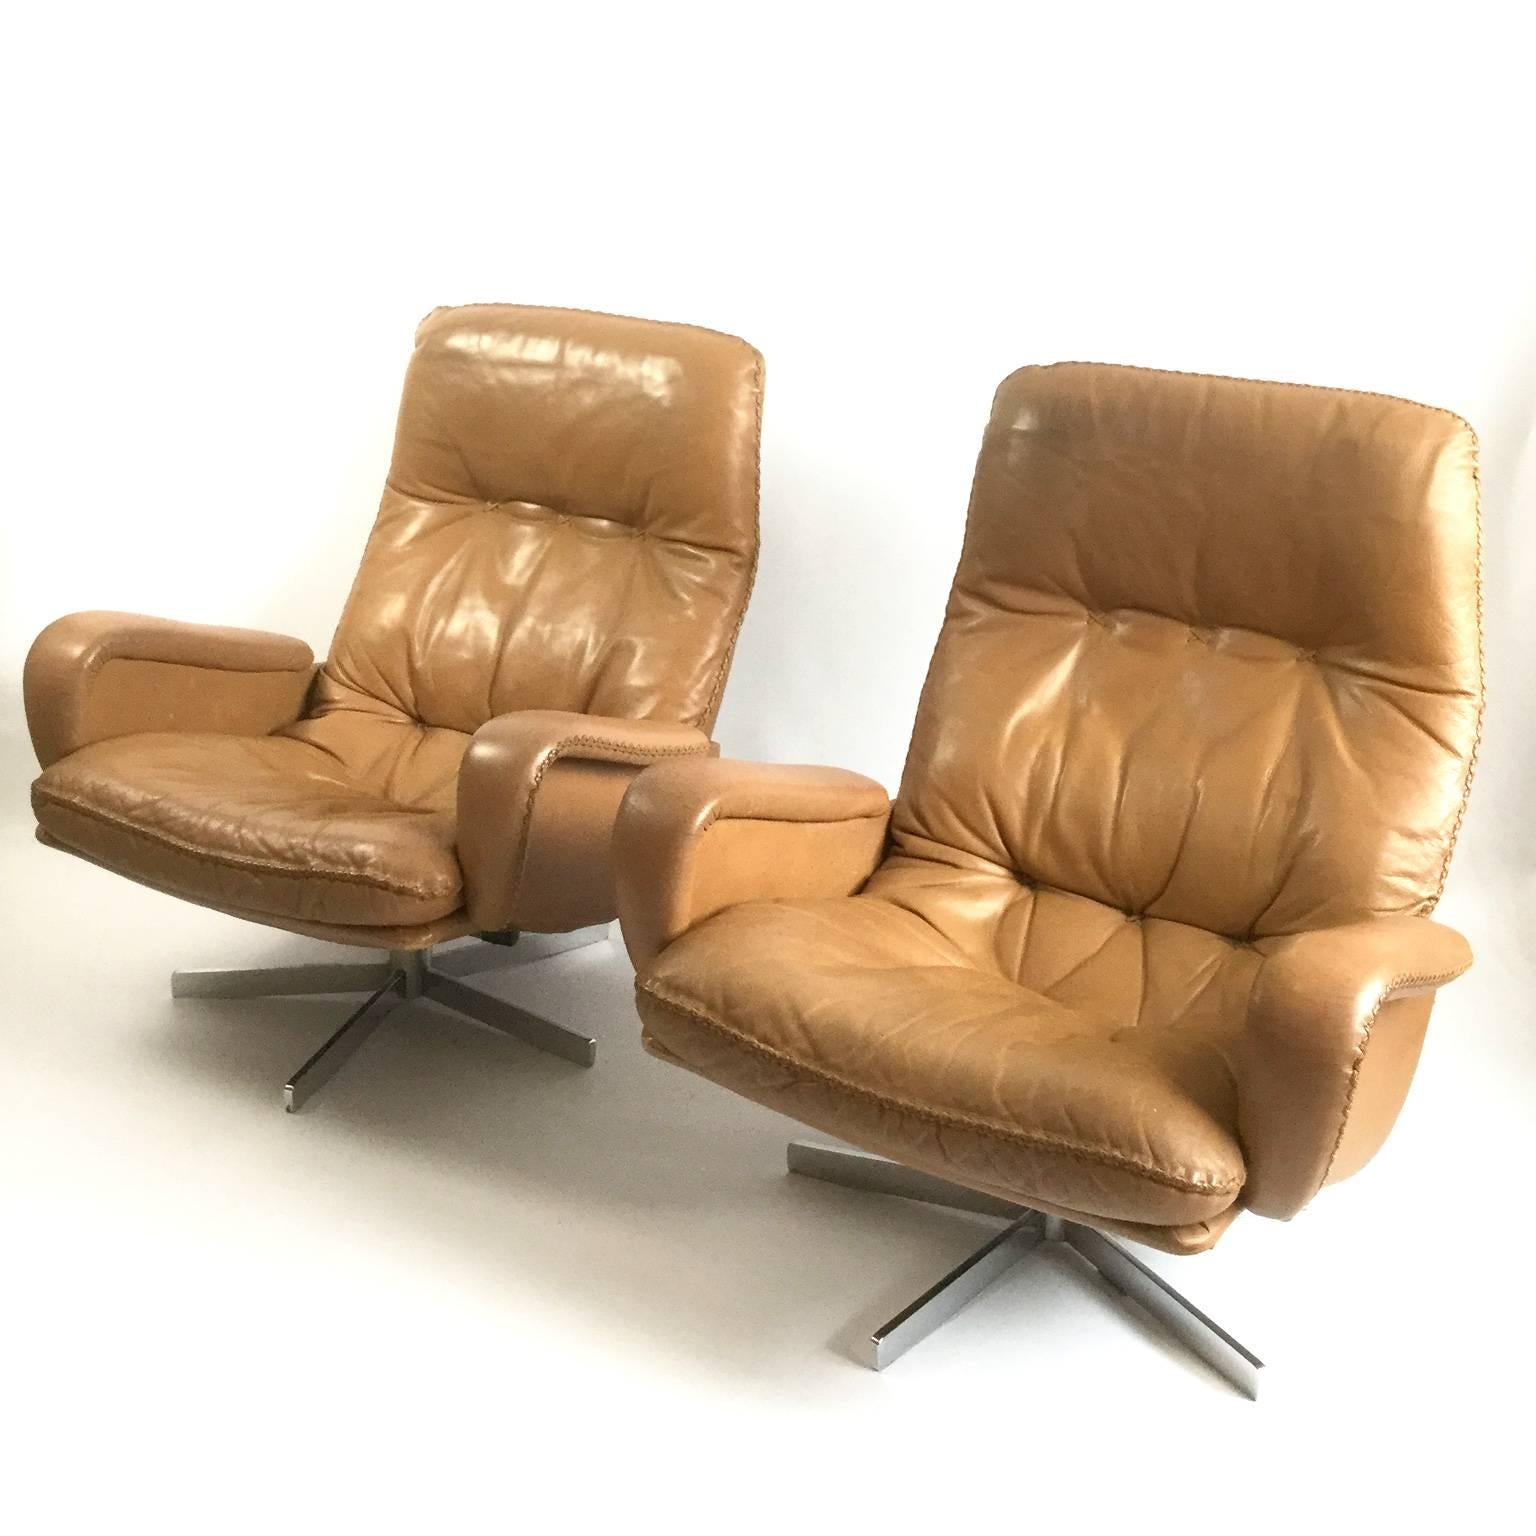 Mid-Century Modern Pair of De Sede S231 James Bond Armchairs with Ottoman, 1960s For Sale